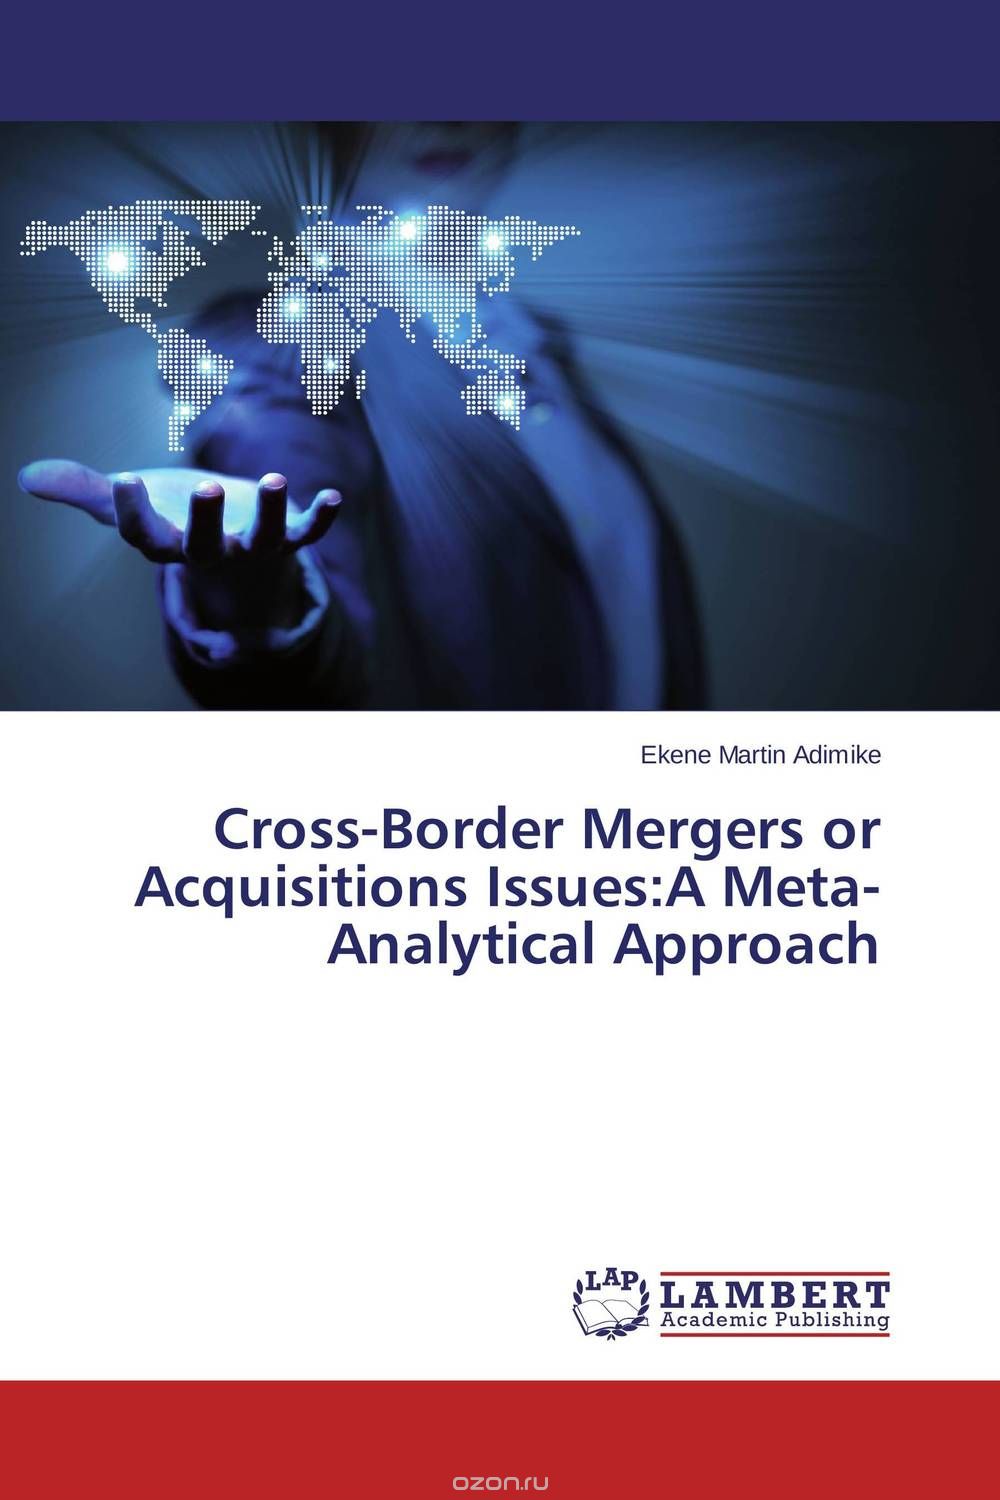 Скачать книгу "Cross-Border Mergers or Acquisitions Issues:A Meta-Analytical Approach"